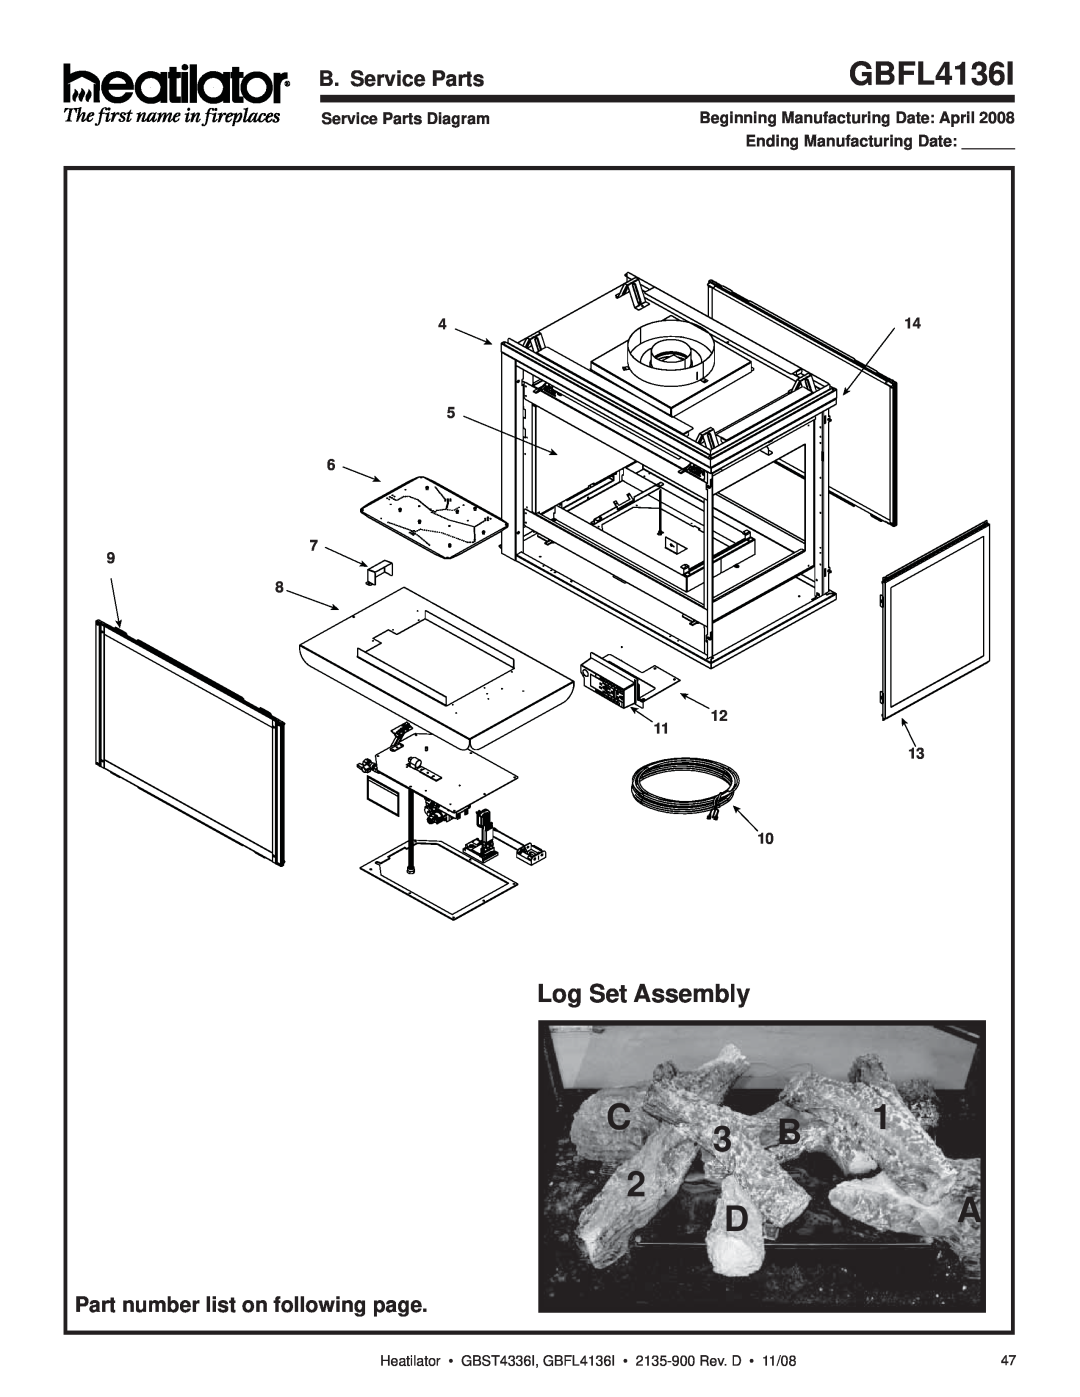 Hearth and Home Technologies GBST4336I GBFL4136I, C 3 B, Log Set Assembly, B. Service Parts, Service Parts Diagram 